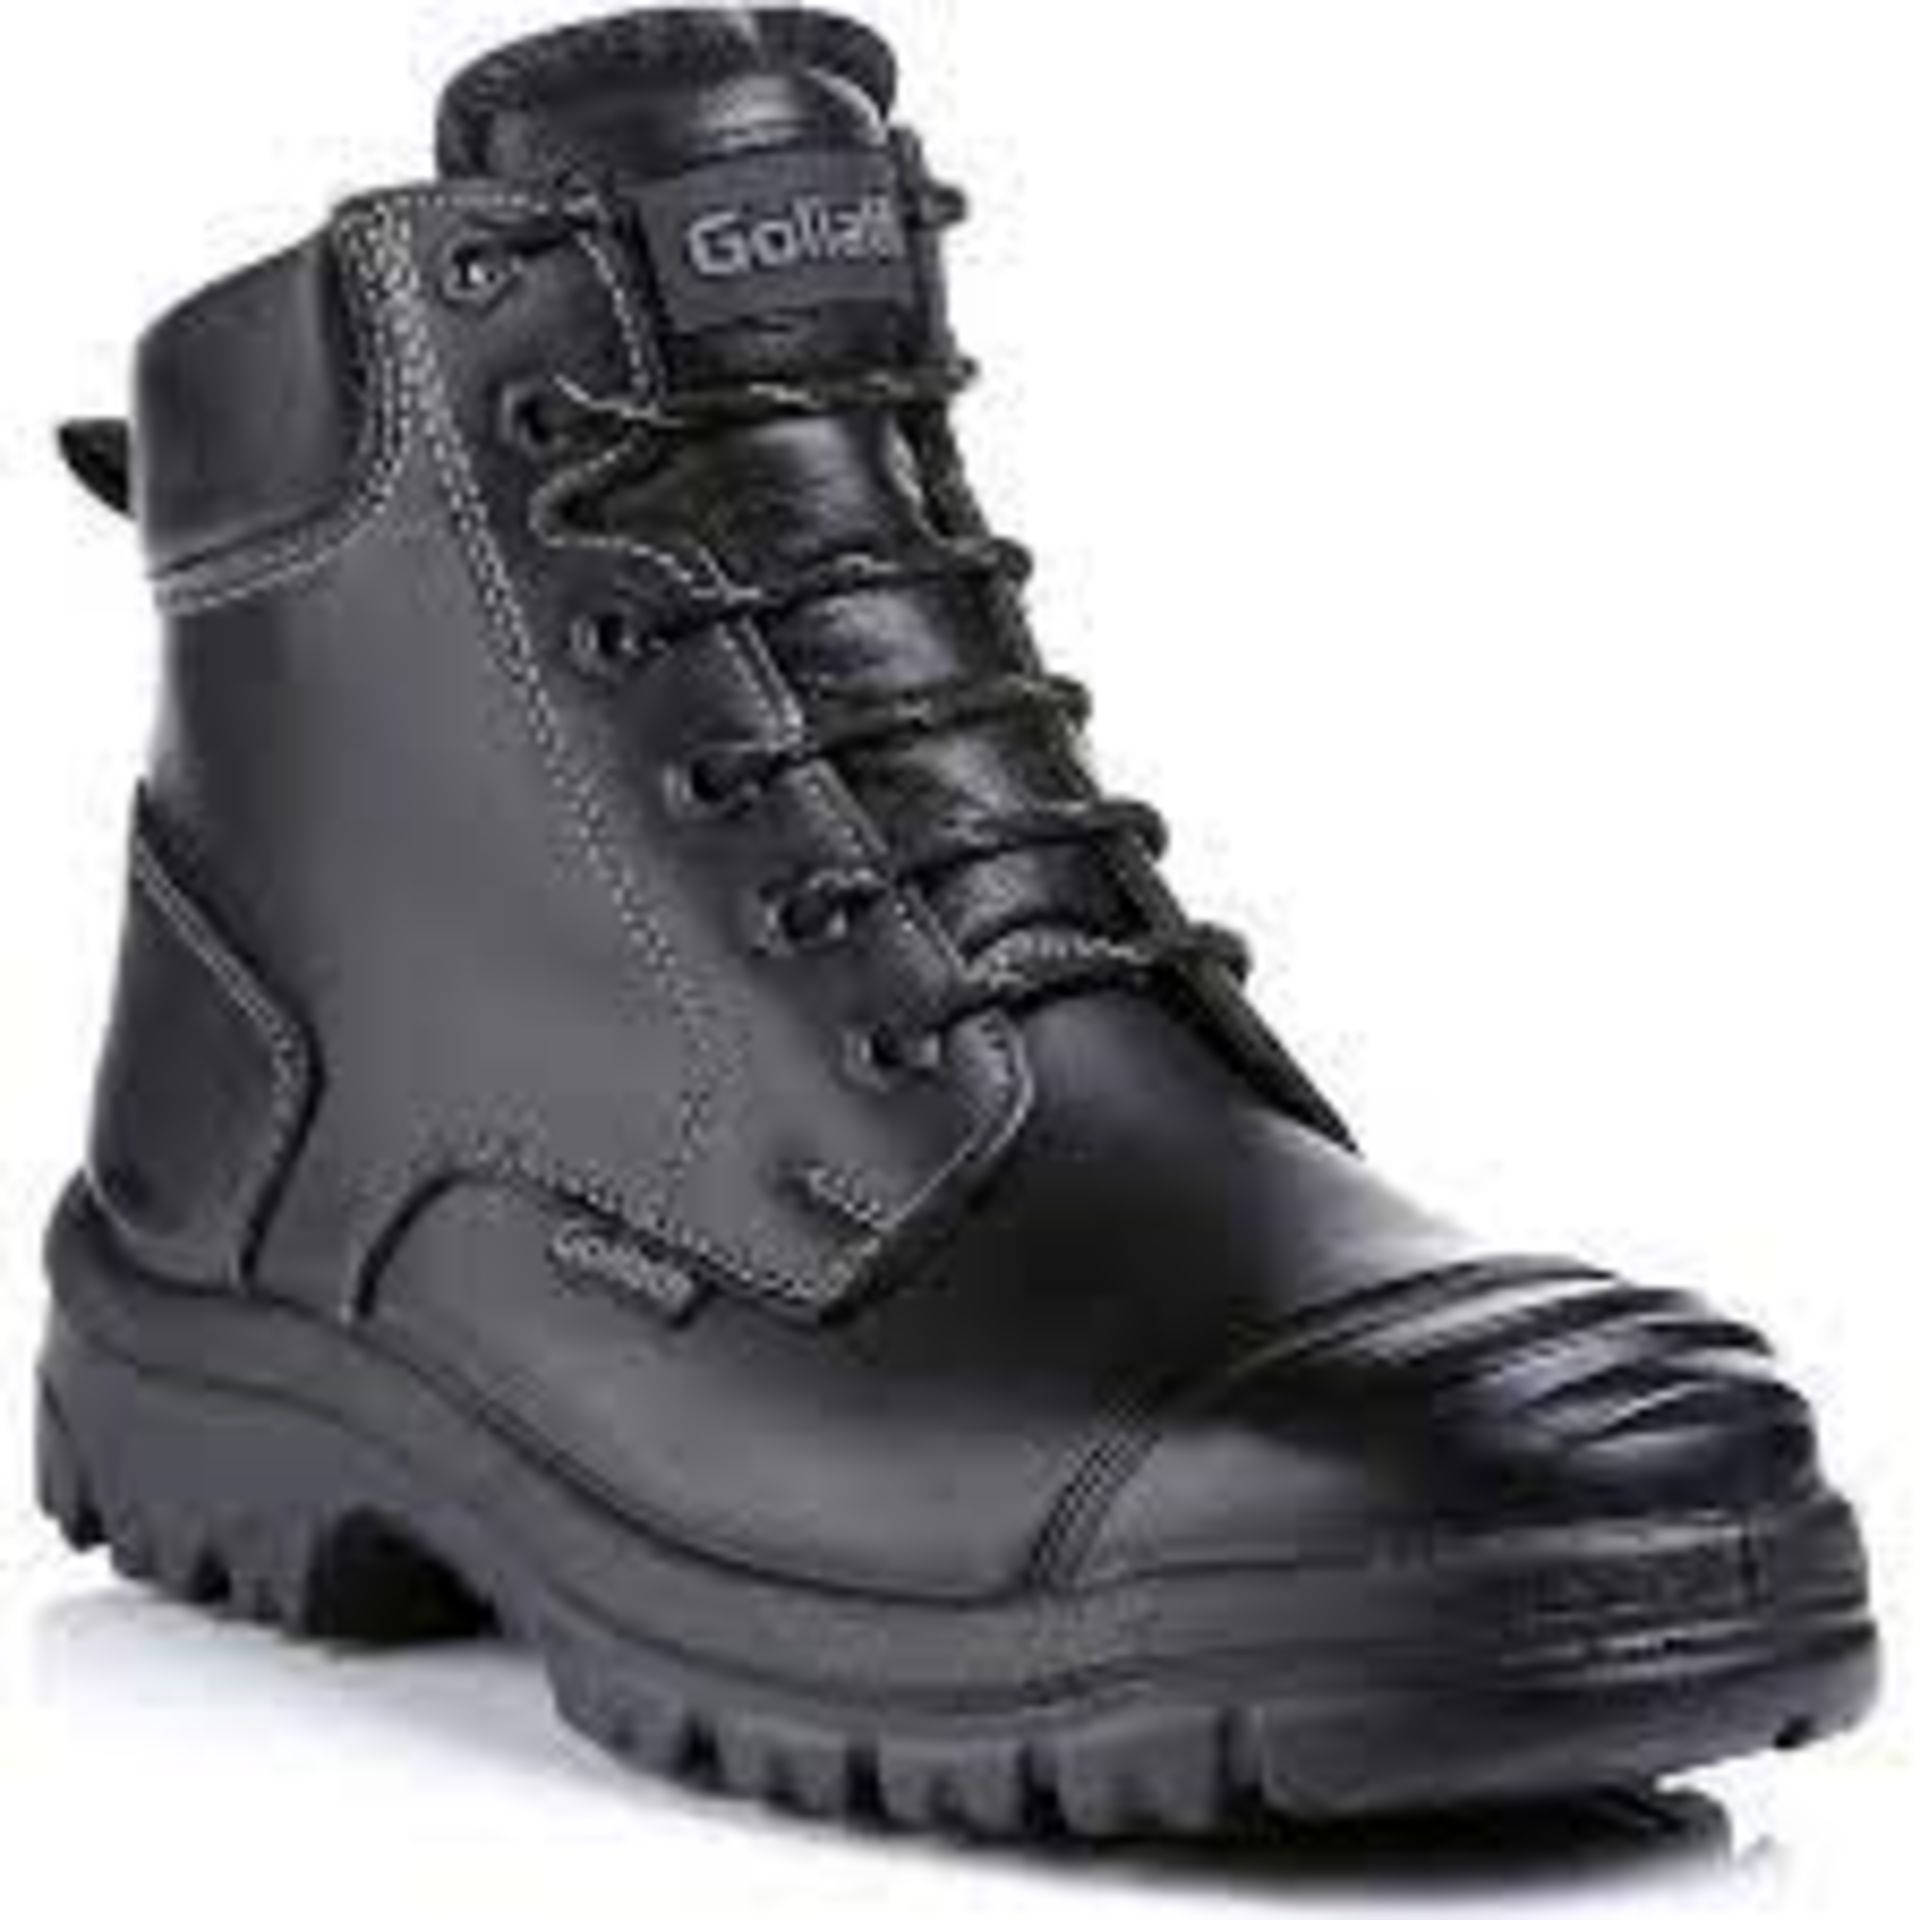 6 X BRAND NEW GOLIATH PROFESSIONAL WORK BOOTS IN VARIOUS STYLES AND SIZES R3